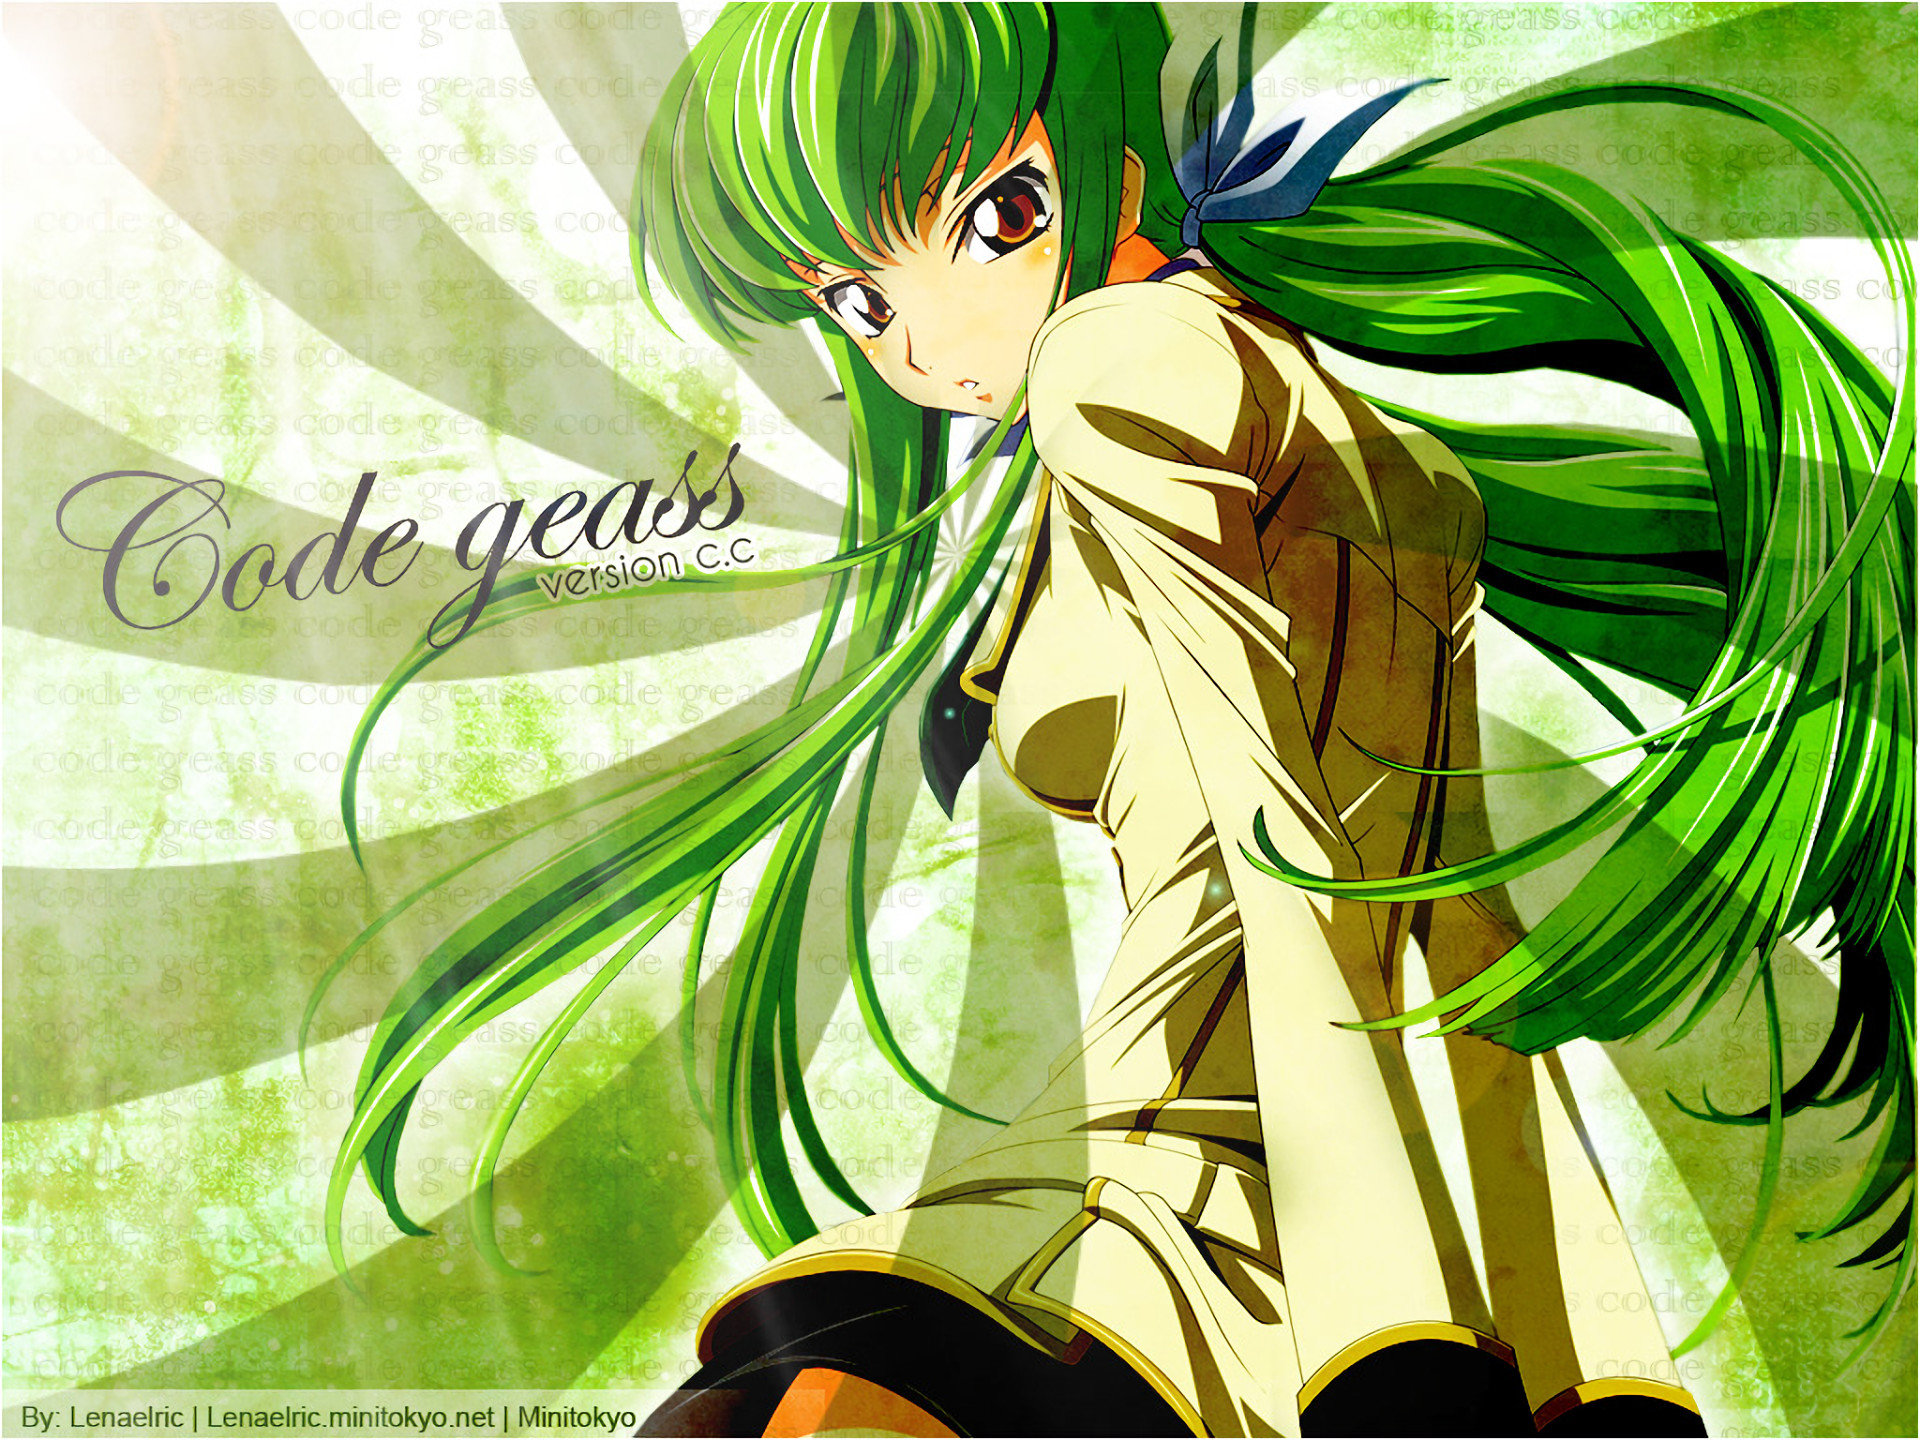 High resolution CC (Code Geass) hd 1920x1440 background ID:44230 for PC